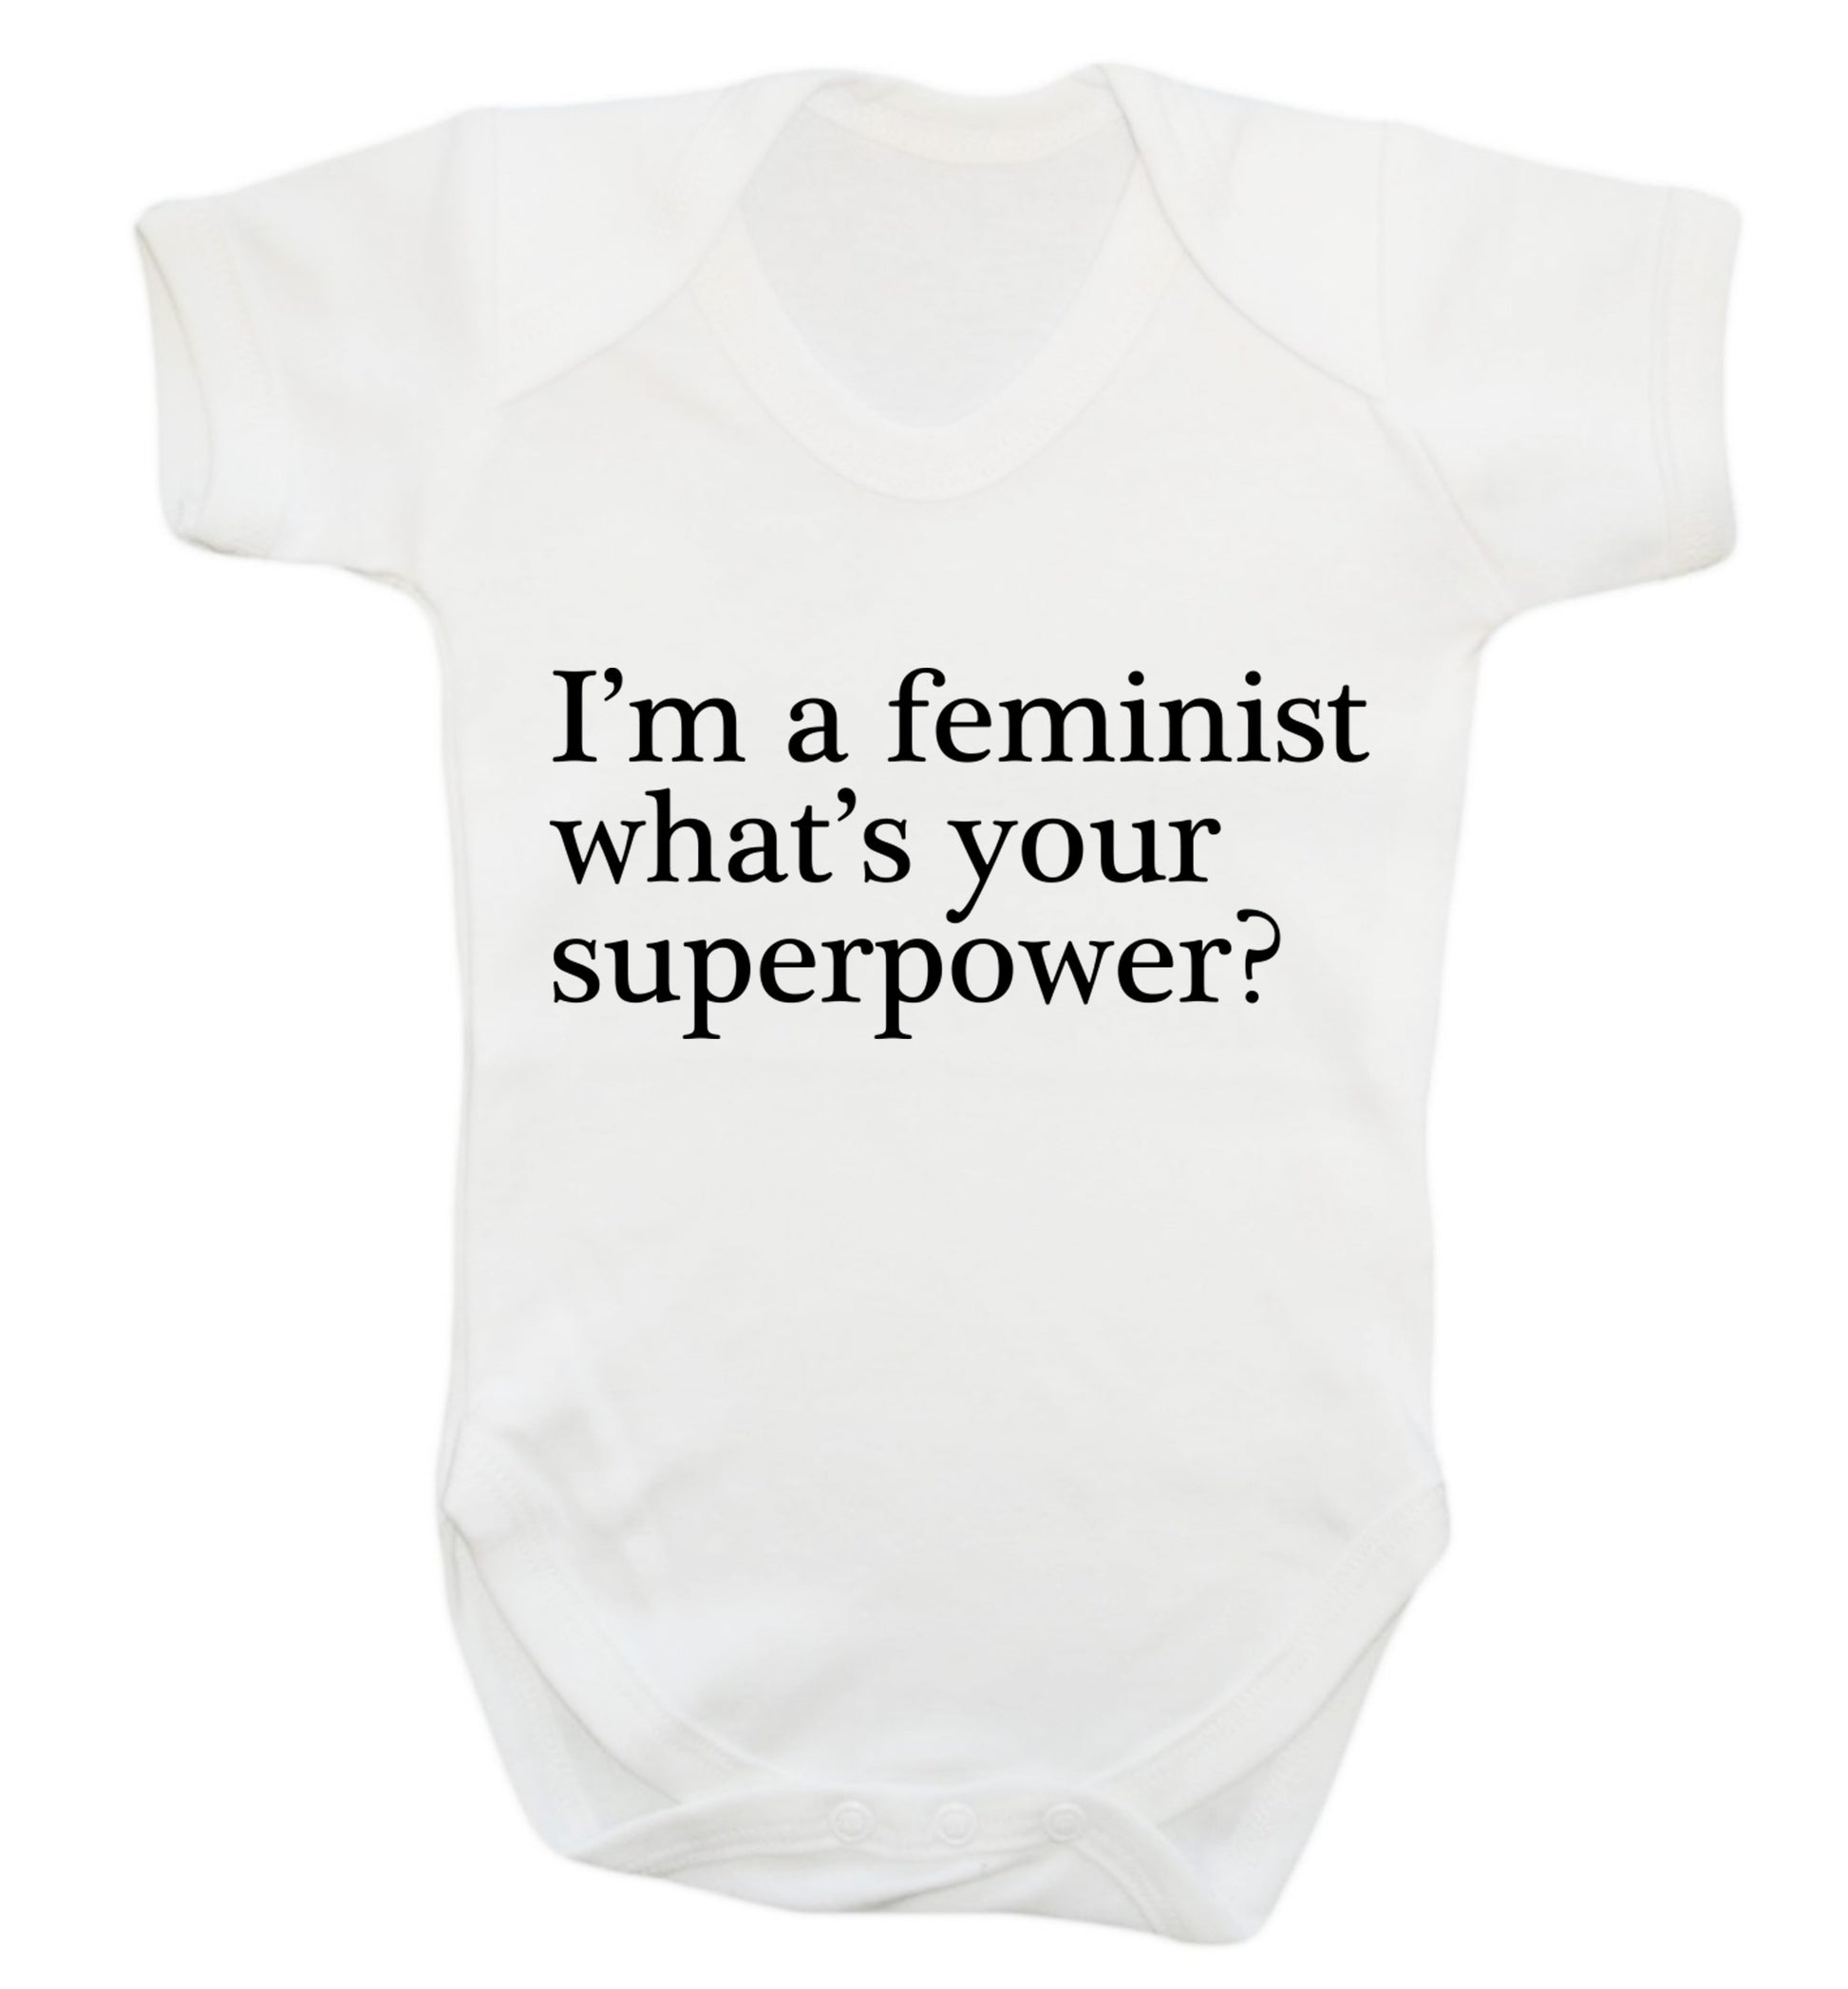 I'm a feminist what's your superpower? Baby Vest white 18-24 months